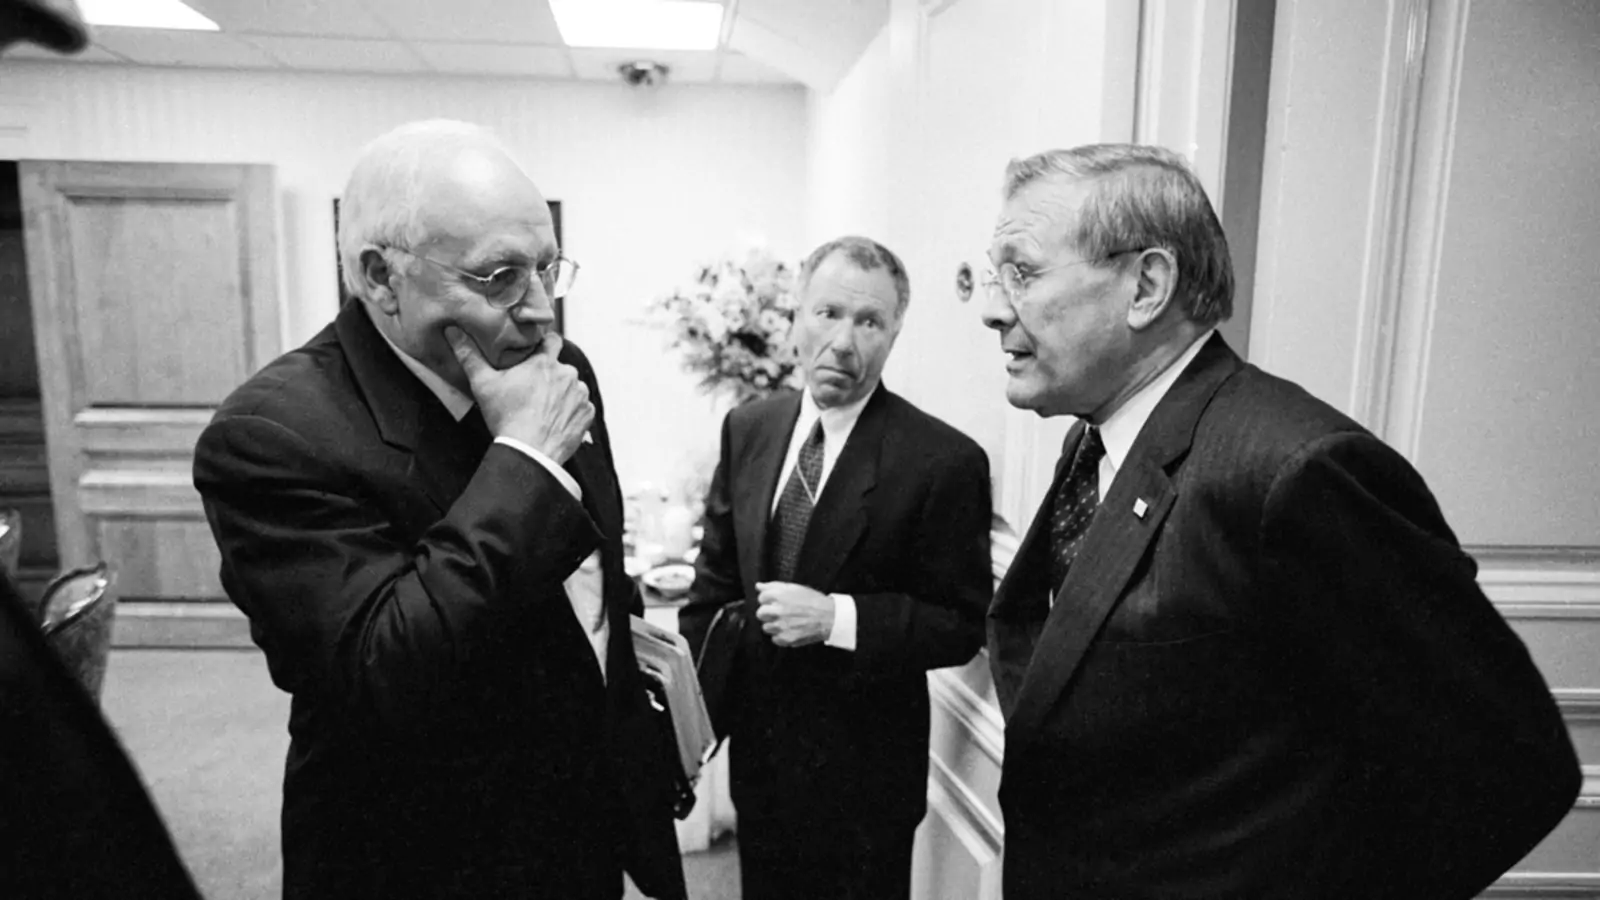 Vice President Dick Cheney, his chief of staff, Scooter Libby, and Secretary of Defense Donald Rumsfeld talk outside the Pentagon briefing room in September 2002.